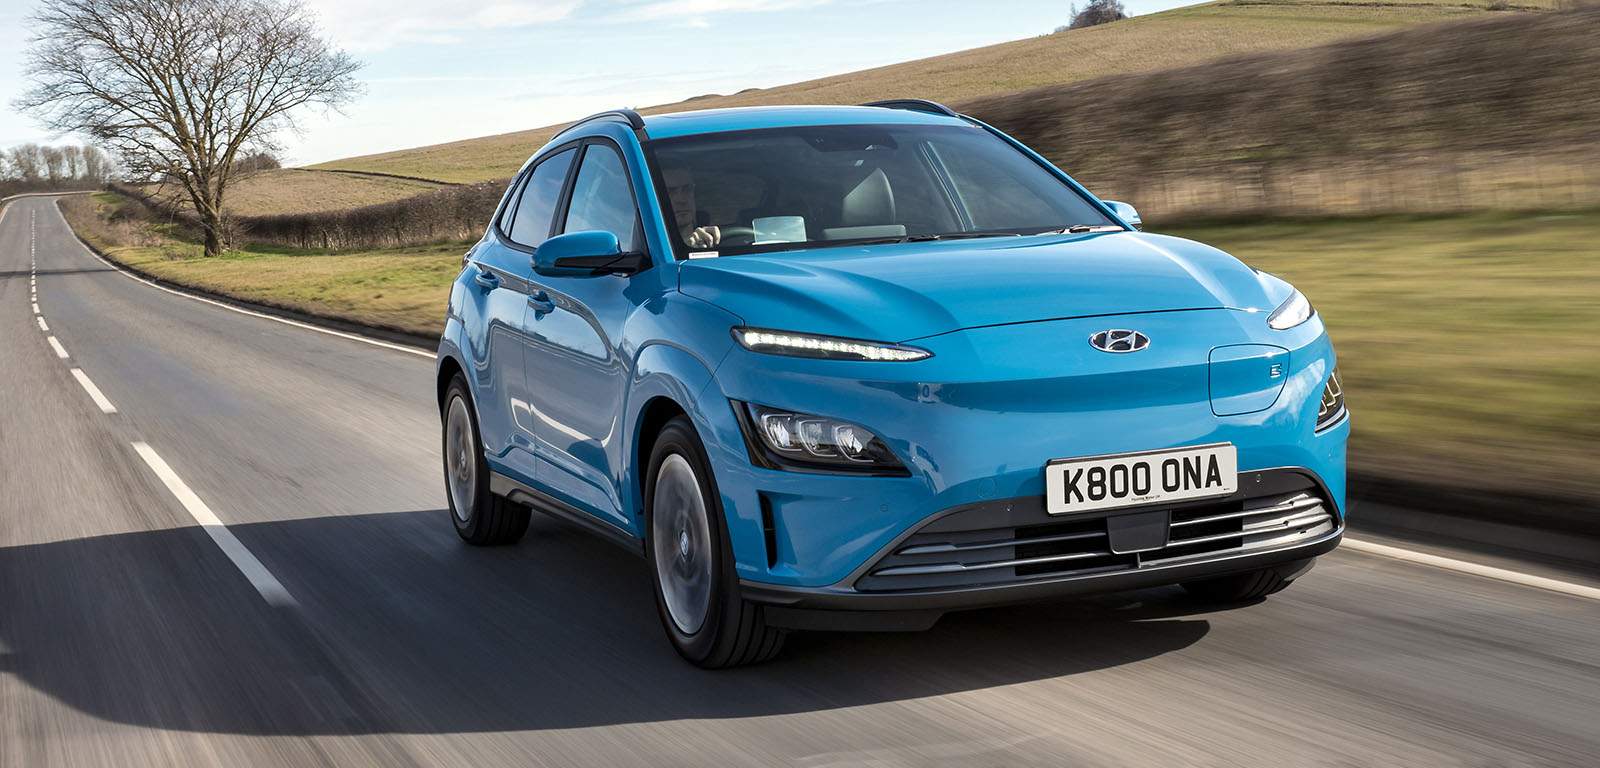 EVs now available for under £35k